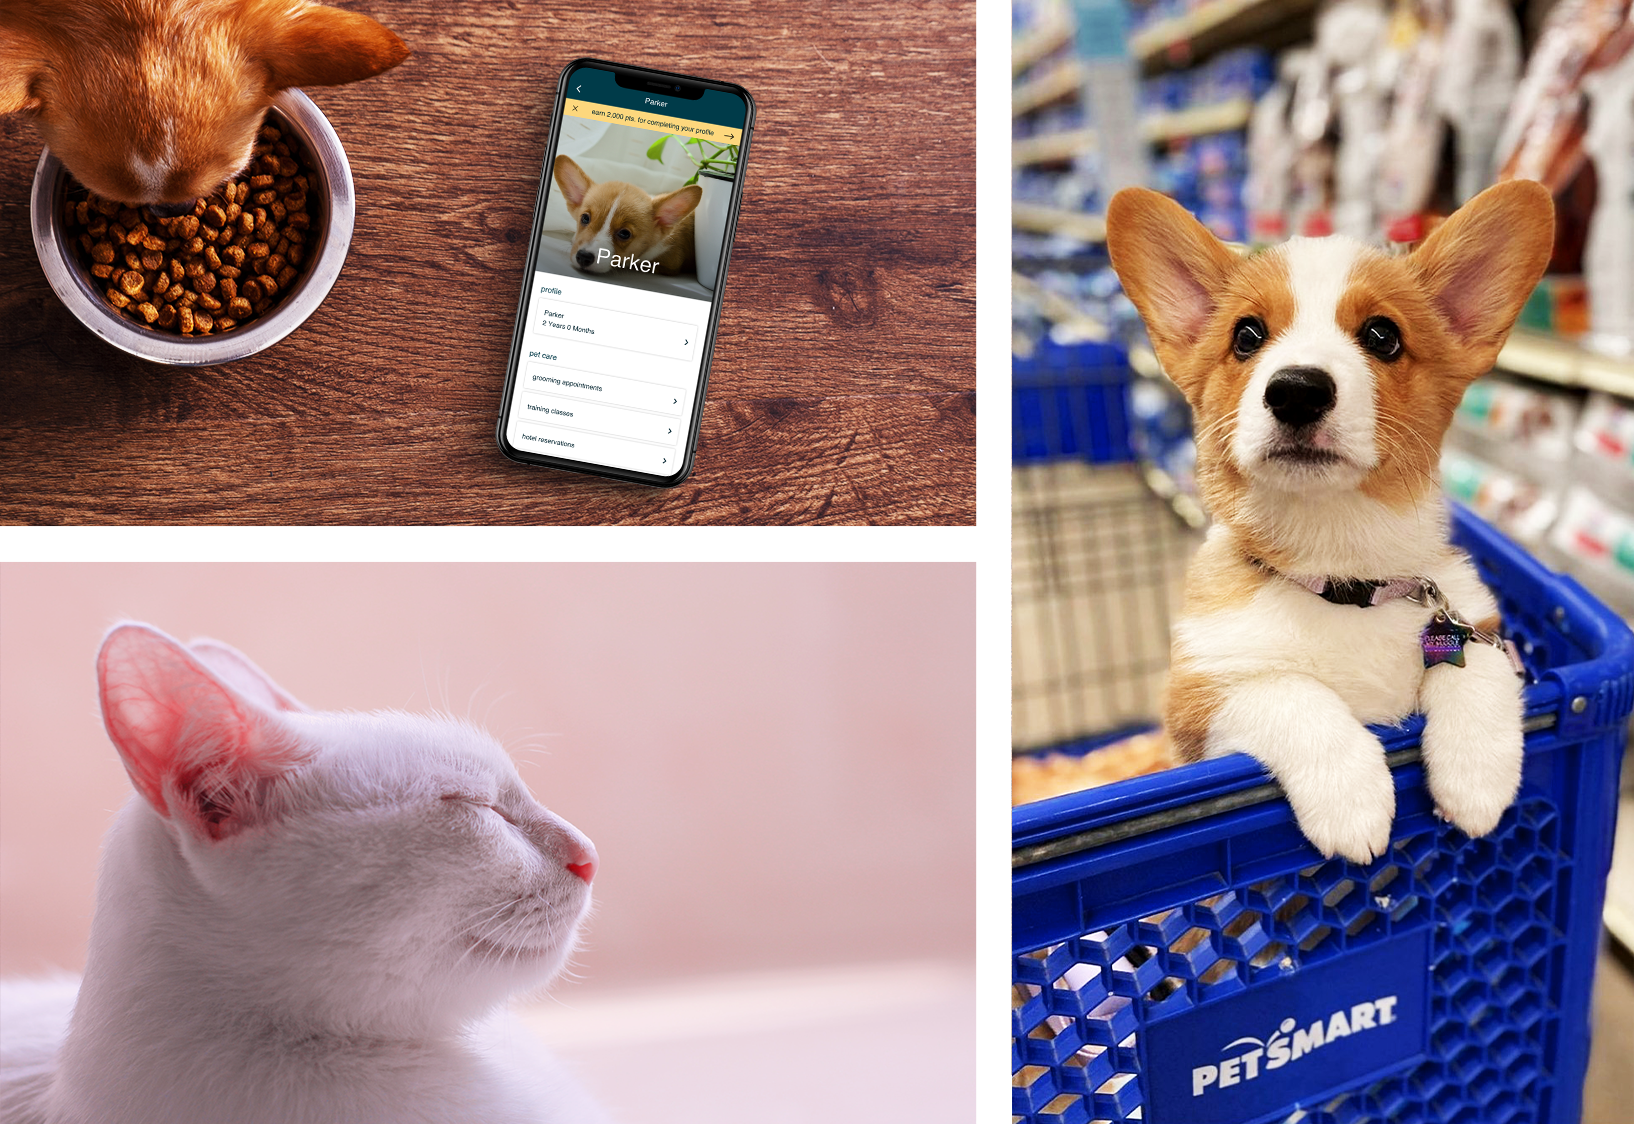 Picture of a sleeping cat, a puppy in a grocery cart, and the PetSmart website shown on a mobile phone